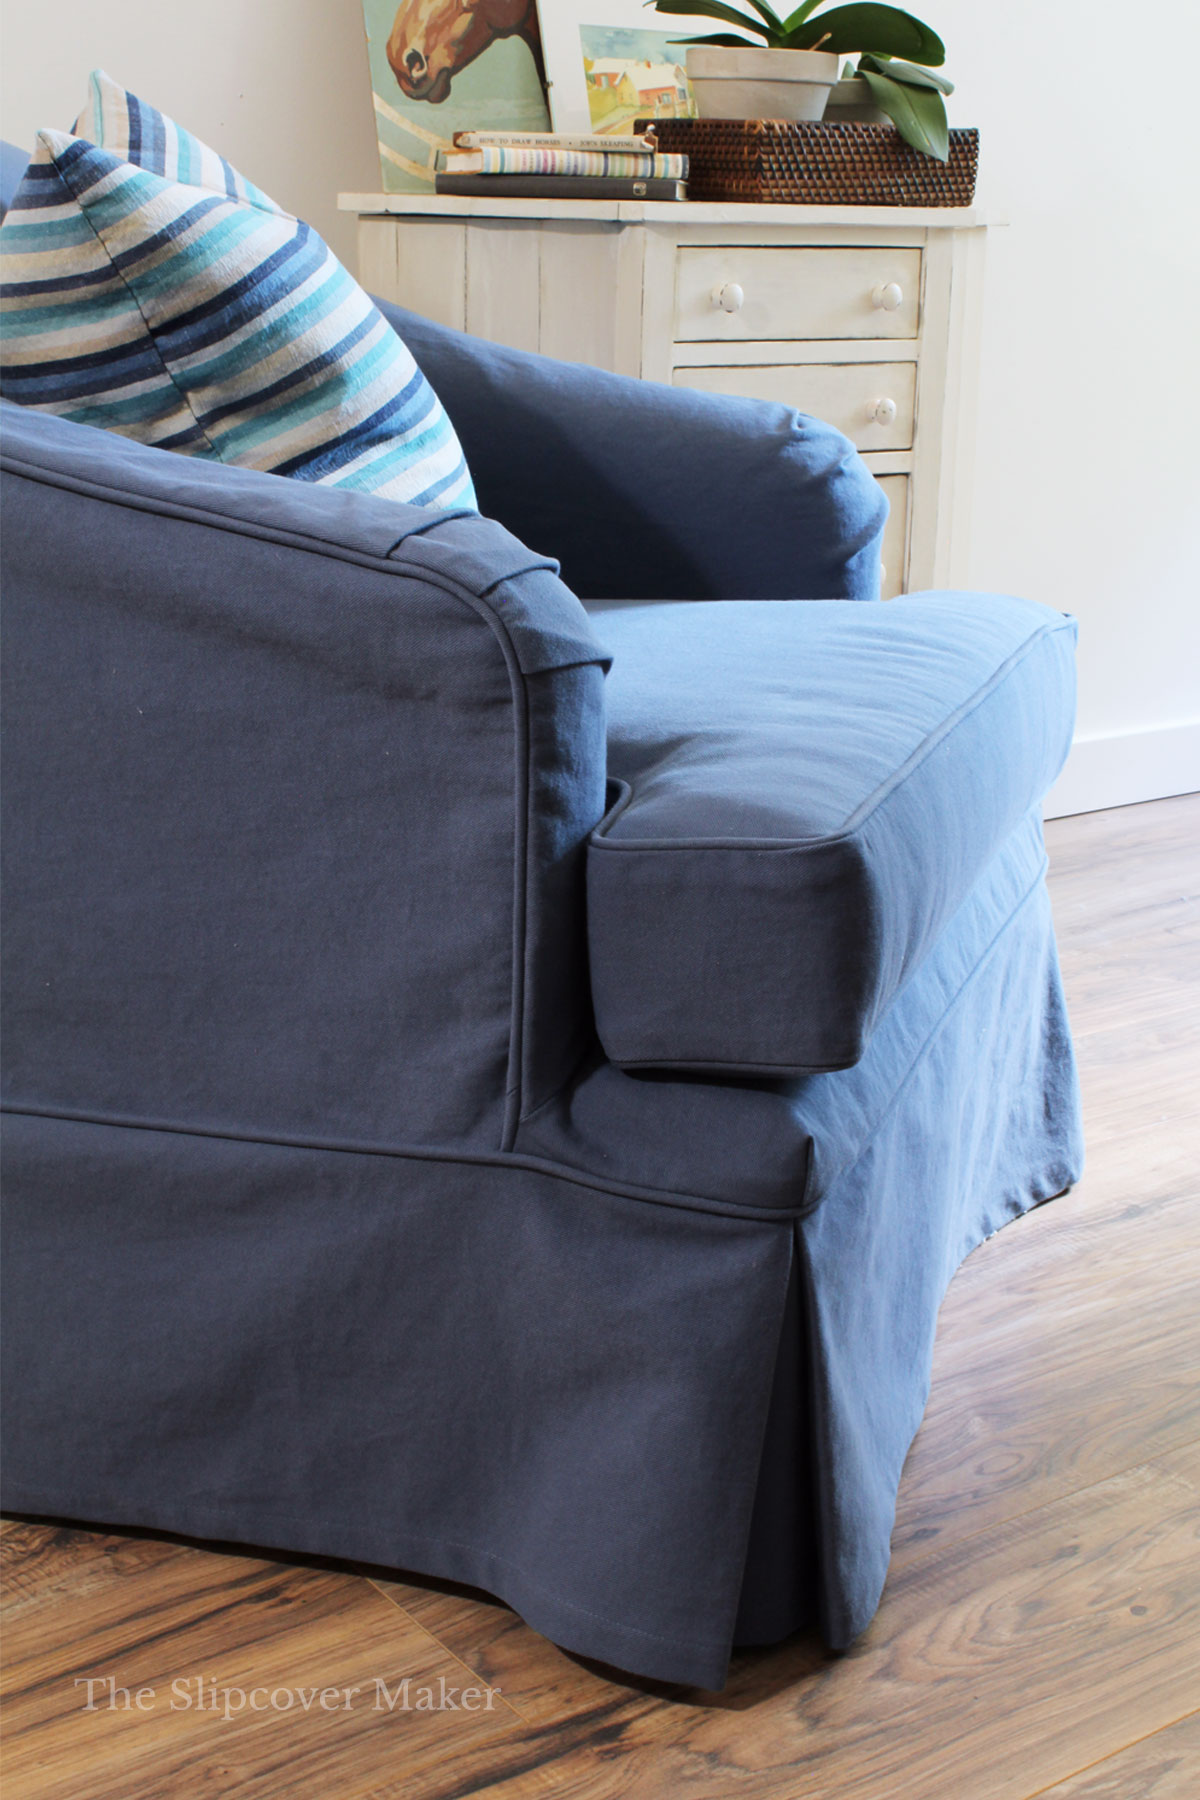 Slipcover Pin Fit Tutorial Part 4: Skirt & Cushion Cover